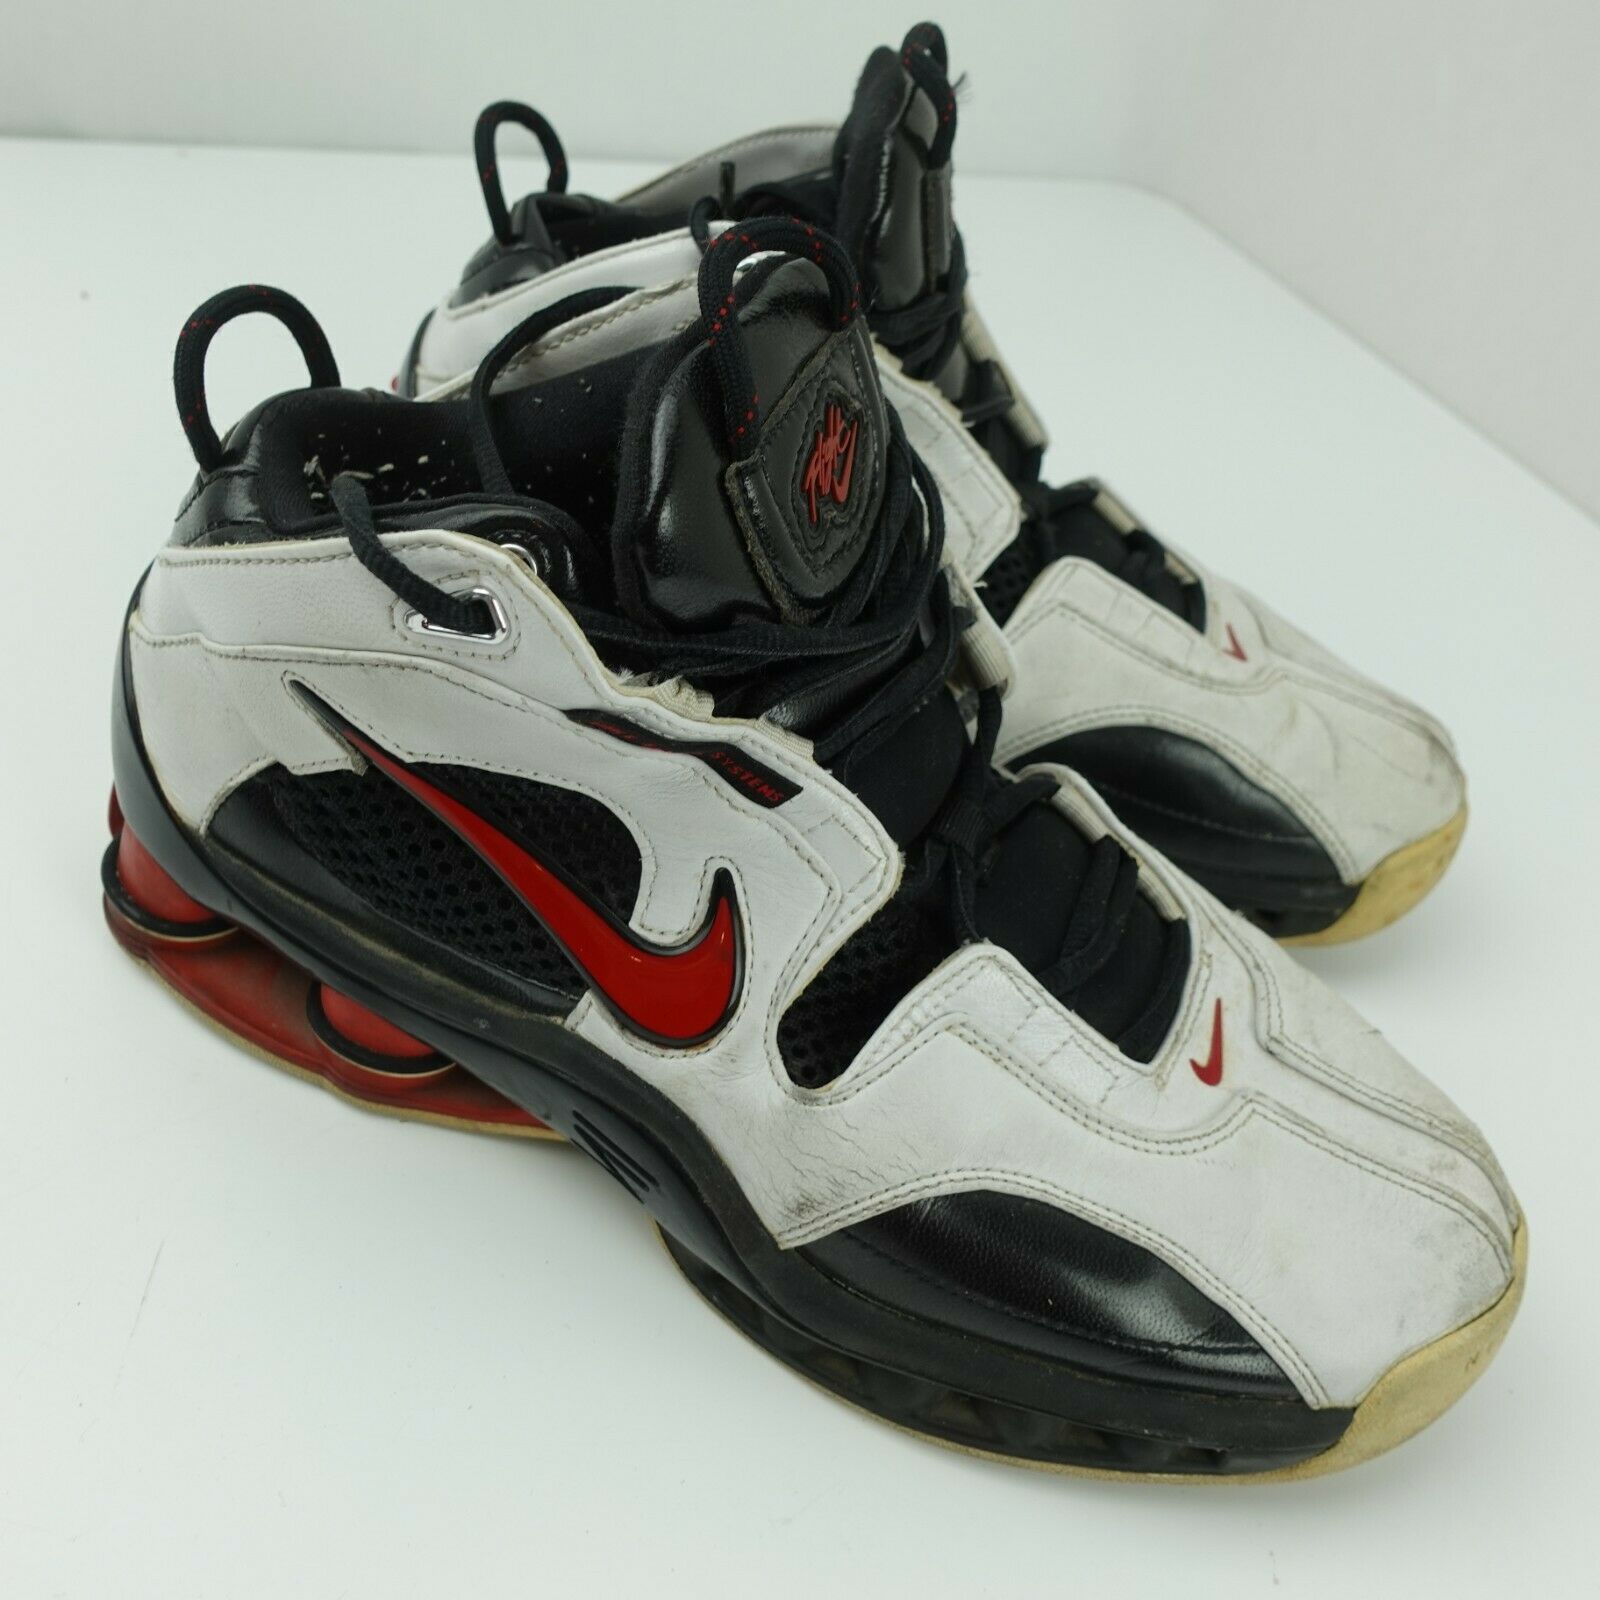 Nike Flight Systems 2004 Shox Men's Shoes Size 10 White Black Red 309267-161